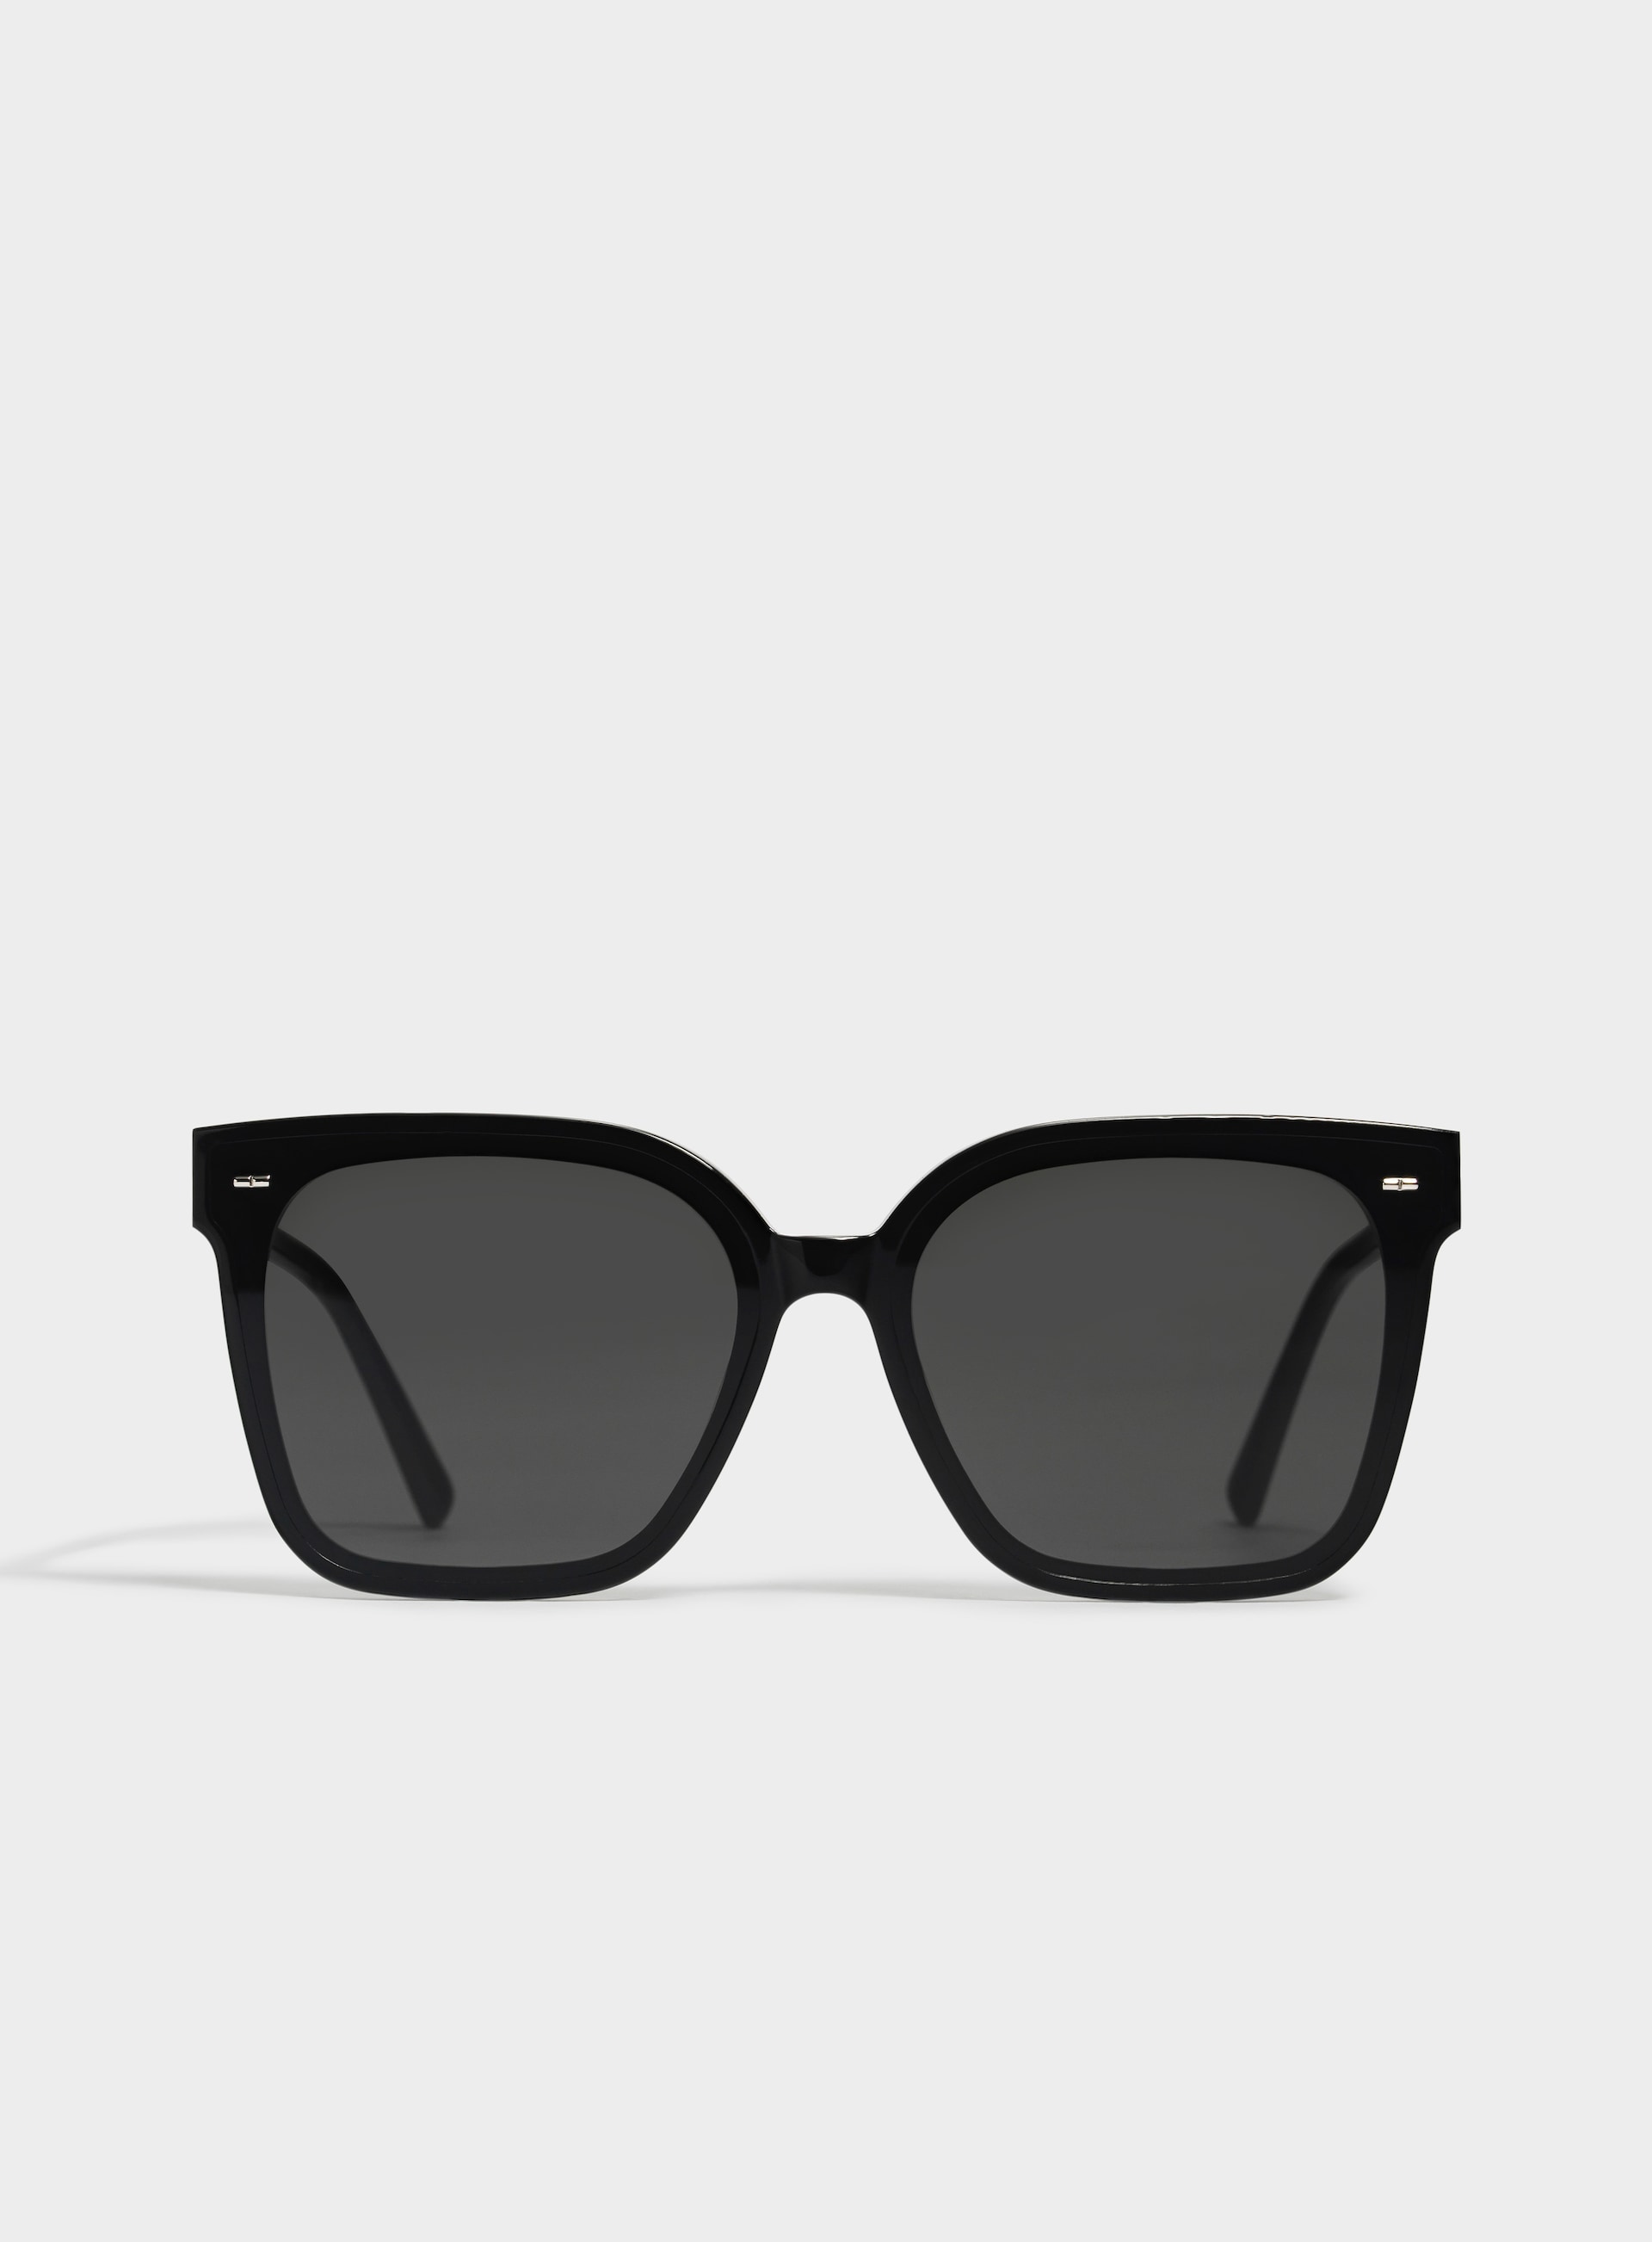 black square sunglasses from gentle monster